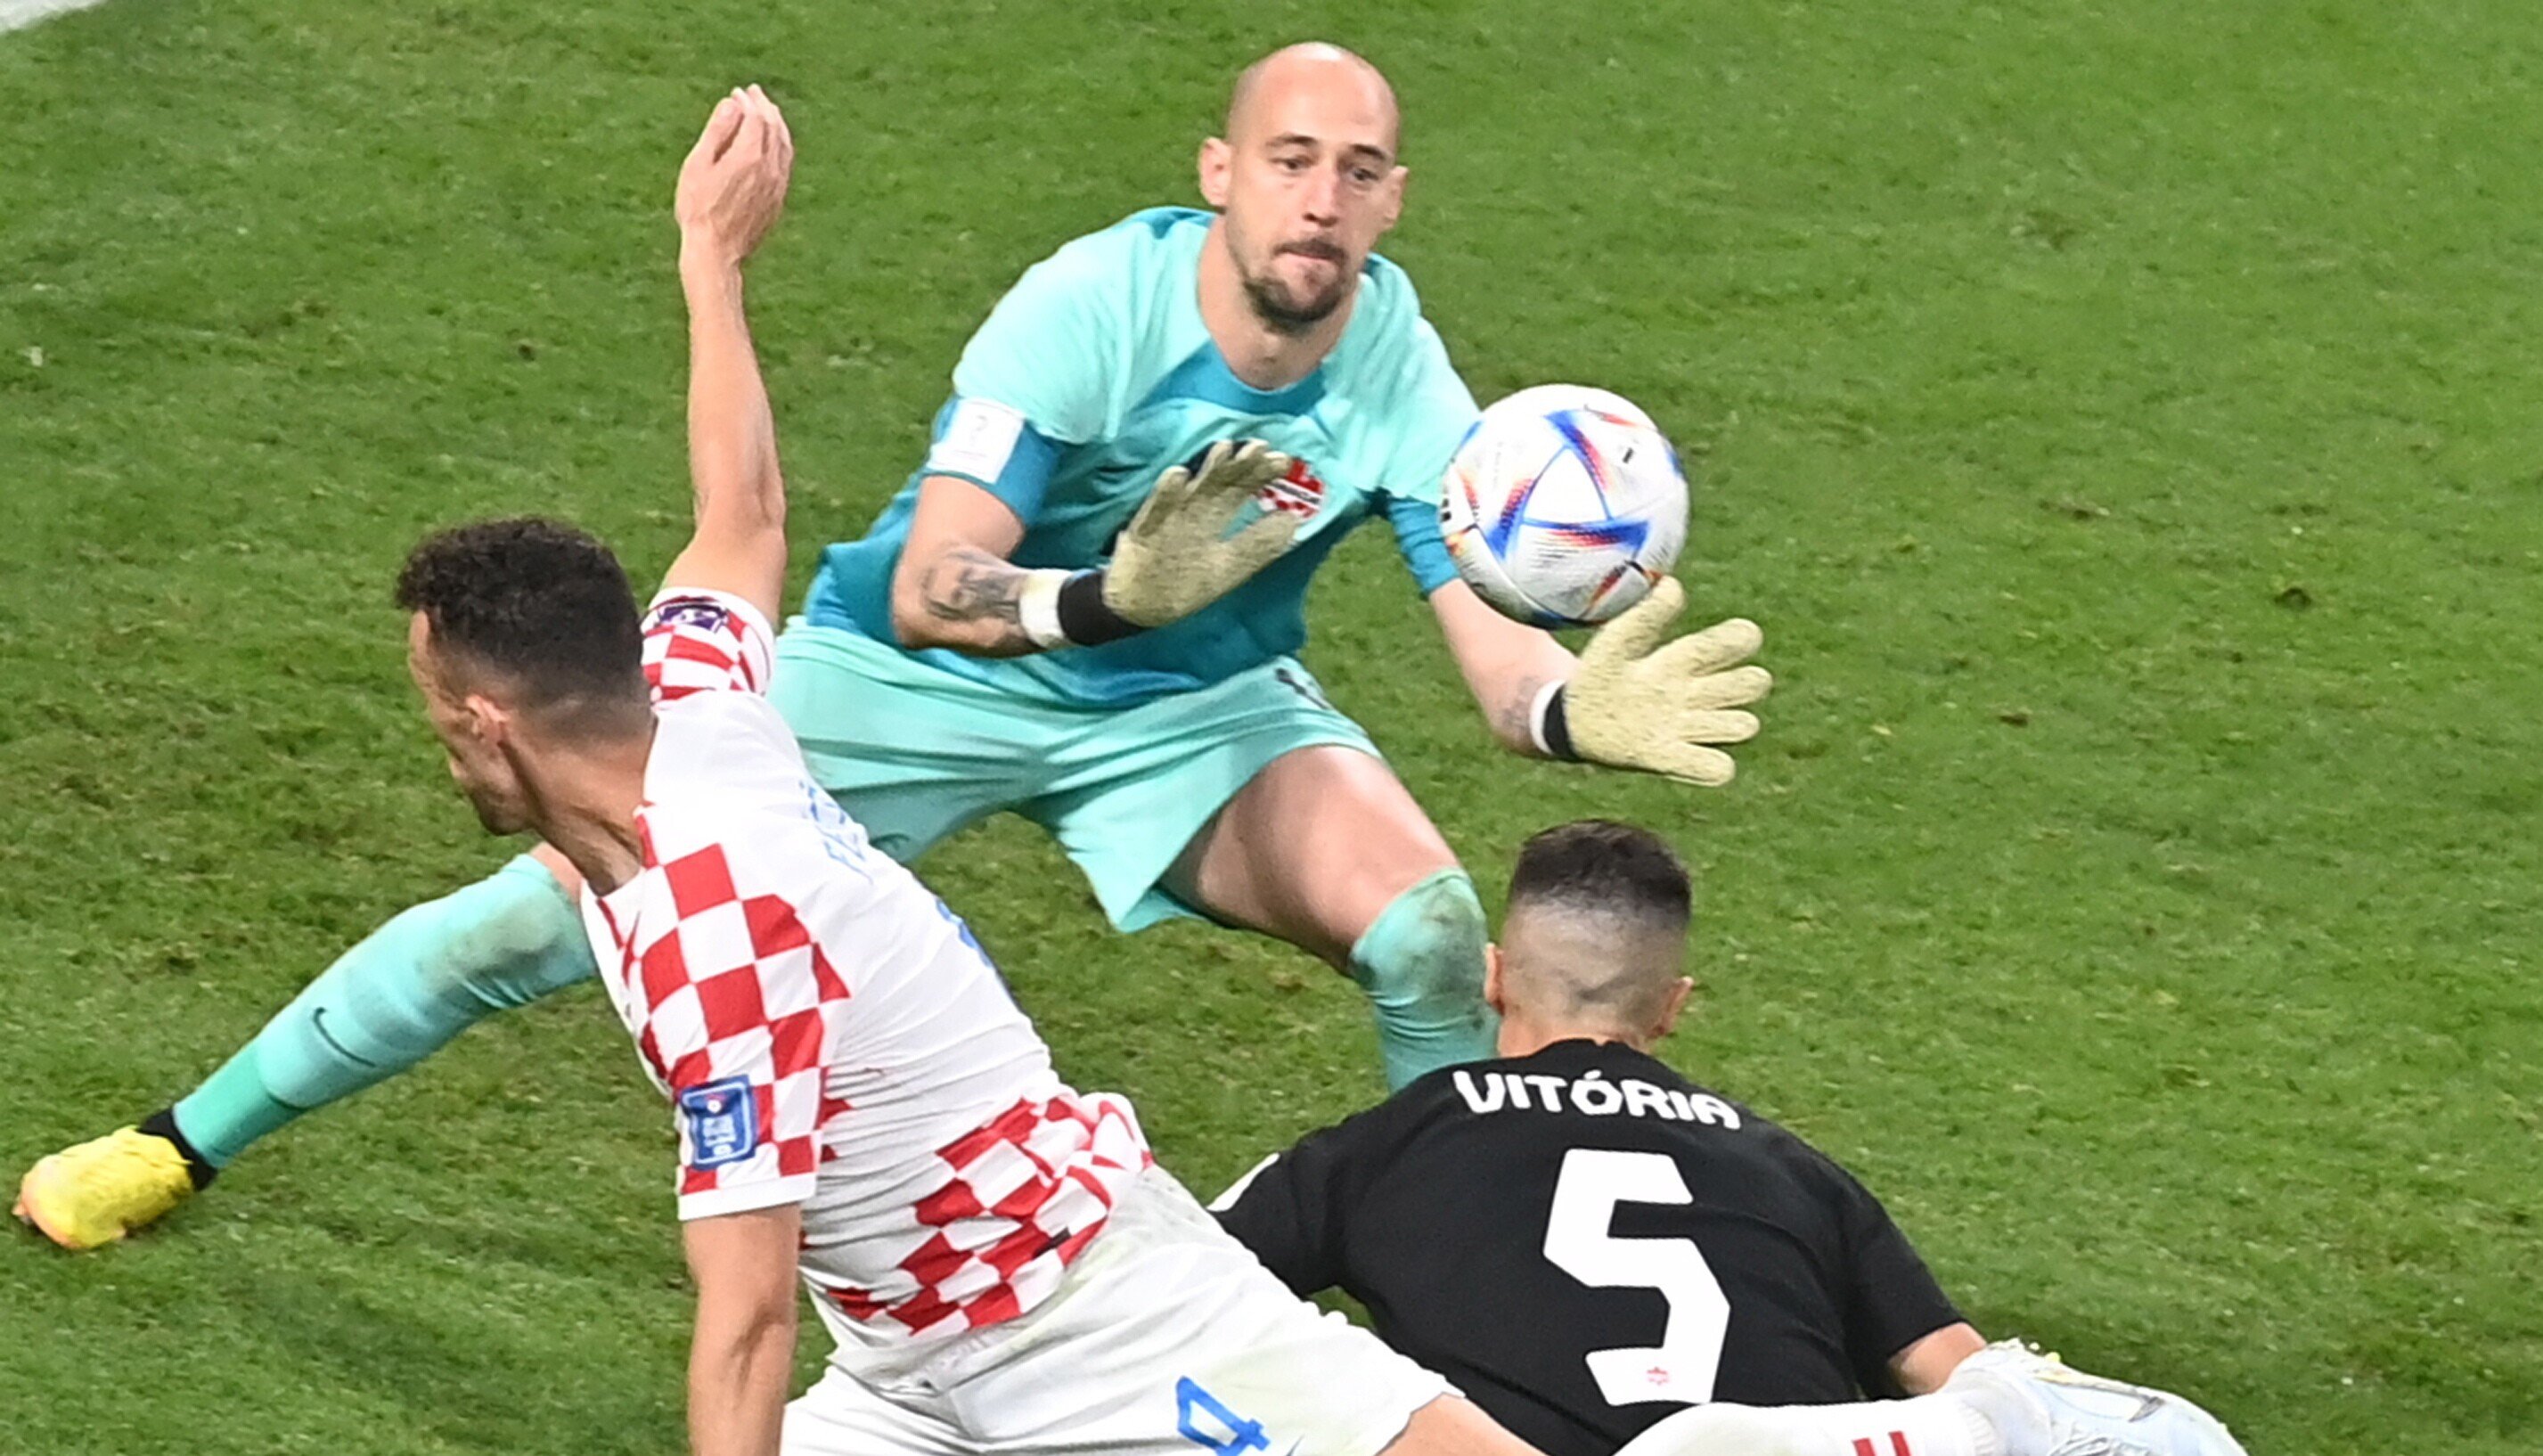 What’s behind the Croatian provocations against the Canadian goalkeeper?